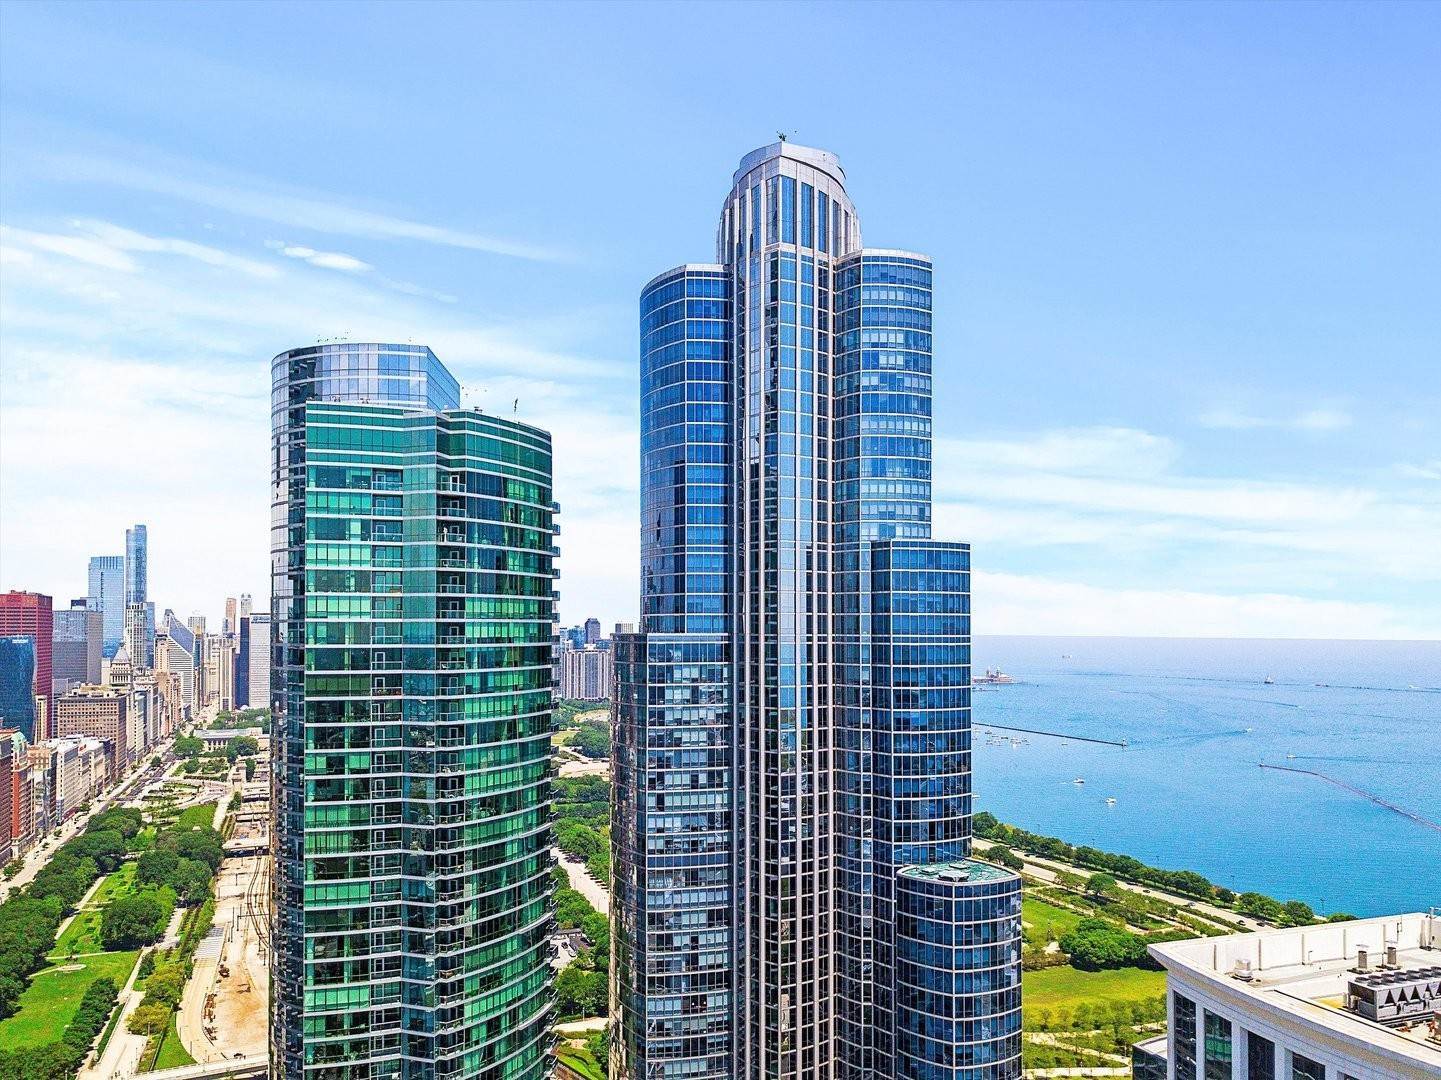 Single Family for Sale at Central Station, Chicago, IL 60605